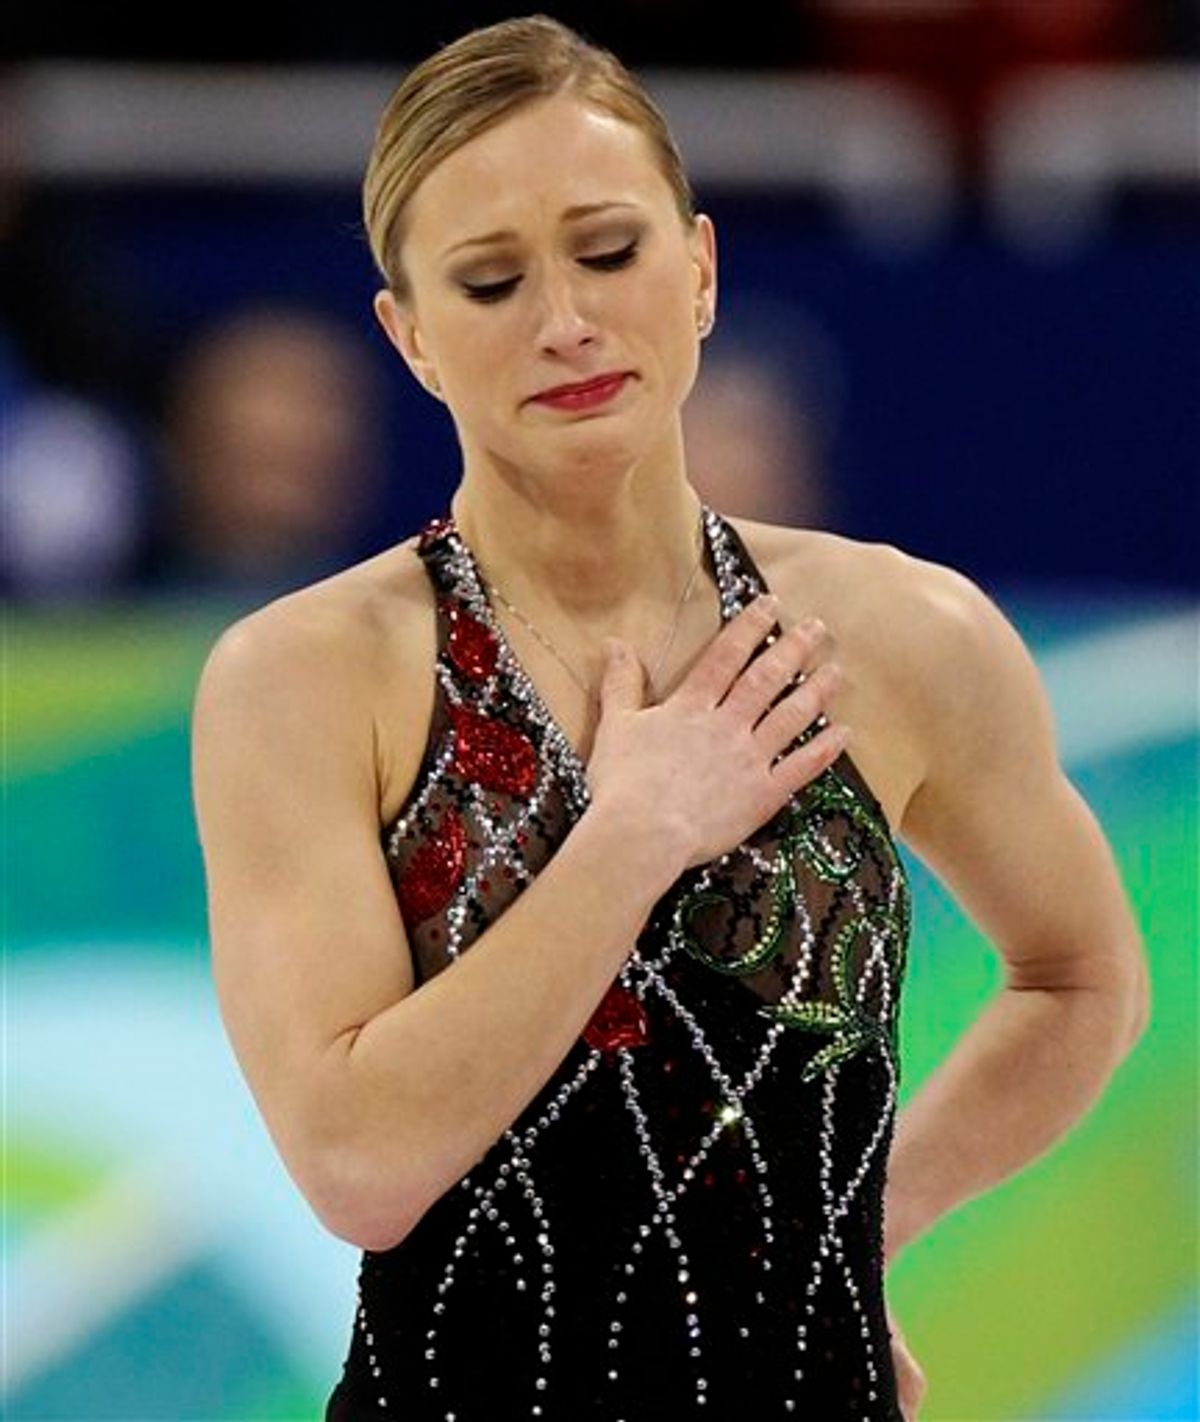 Canada's Joannie Rochette reacts after performing her short program during the women's figure skating competition at the Vancouver 2010 Olympics in Vancouver, British Columbia, Tuesday, Feb. 23, 2010. (AP Photo/Mark Baker) (AP)